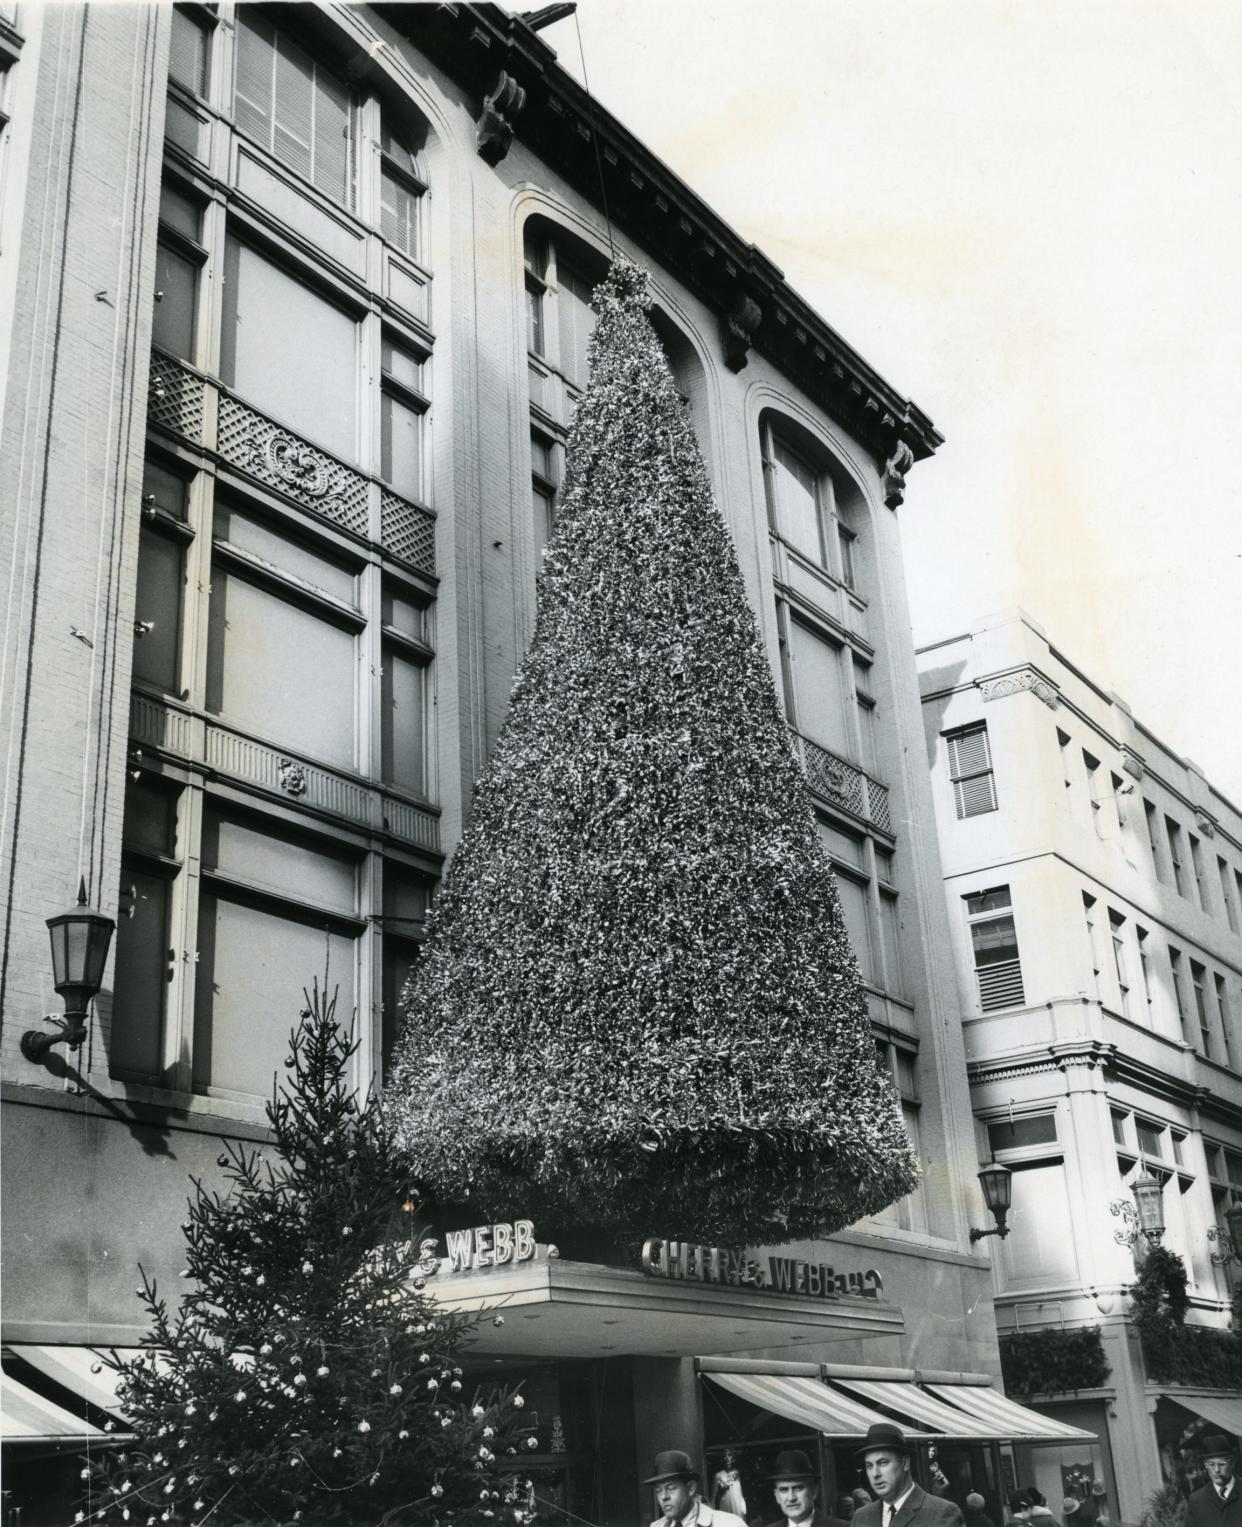 Cherry & Webb first erected its landmark, four-story, gold and silver tree in 1951, then abandoned the effort in 1960 when traffic on Westminster Street made the work difficult. In 1965, with Westminster Street a pedestrian mall, the tradition was revived.